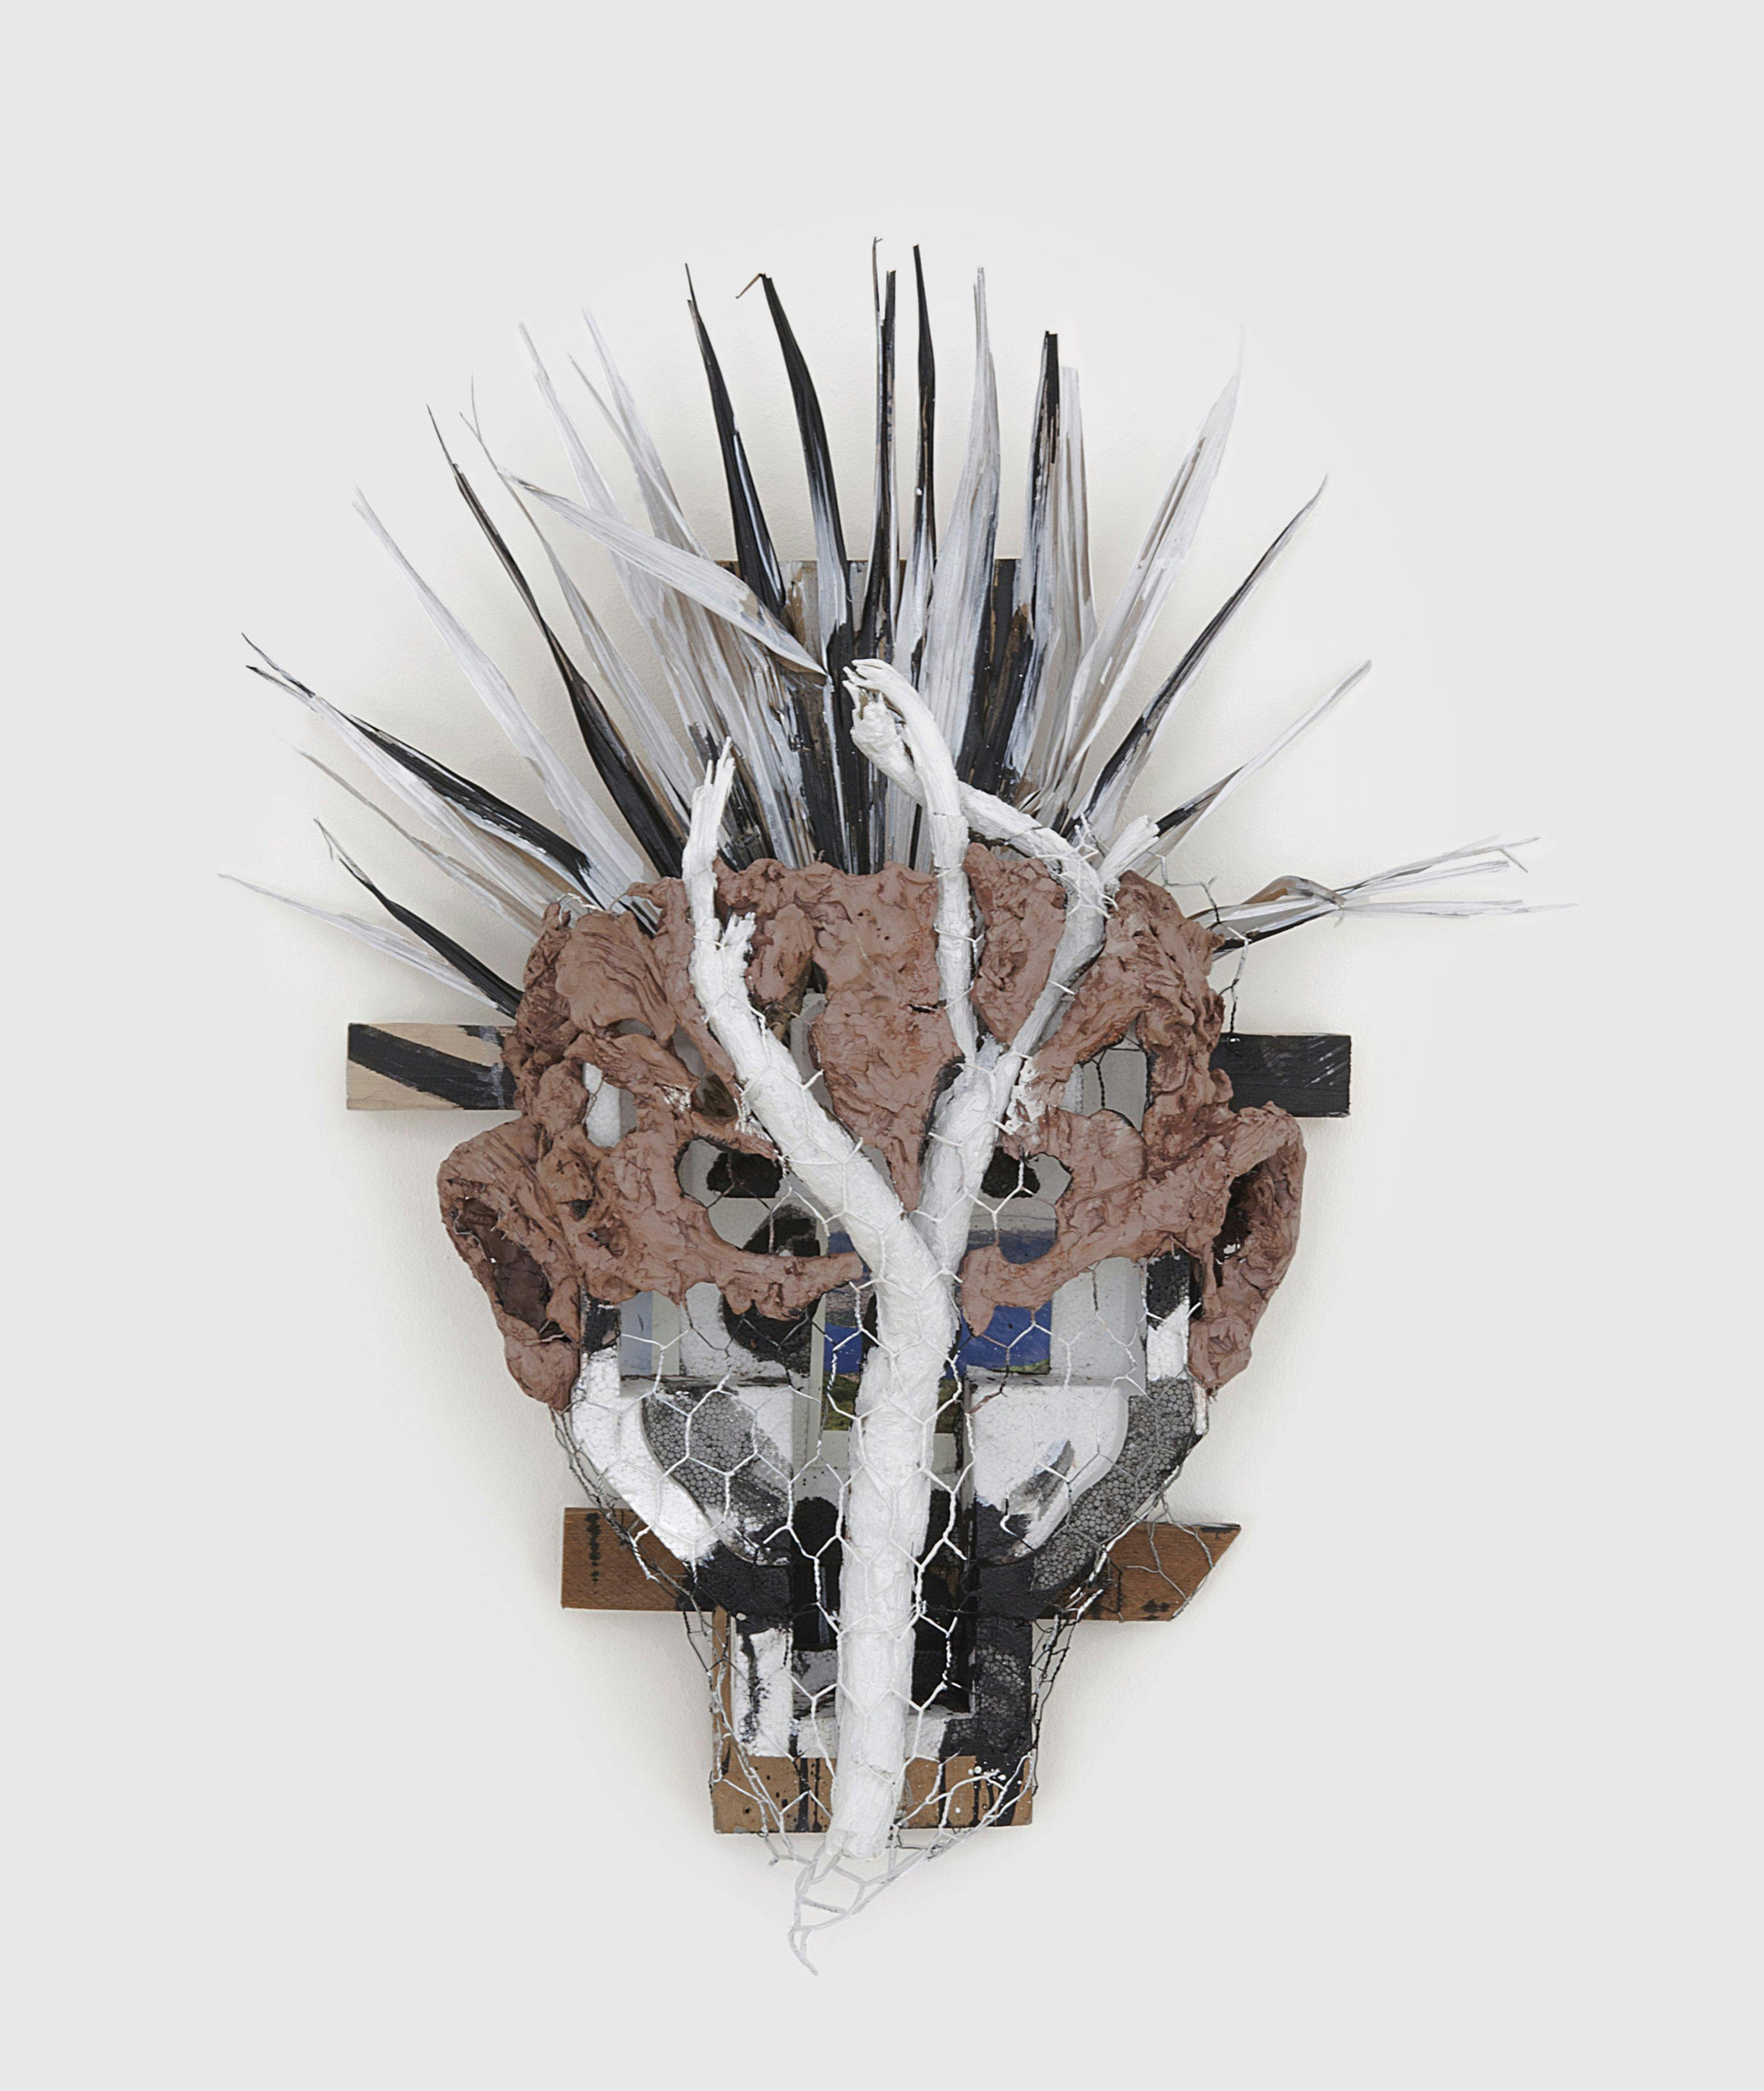 A wood, Styrofoam, clay, wire, paper, acrylic paint, and palm artwork by Huma Bhabha, titled Alfonso, dated 2013.